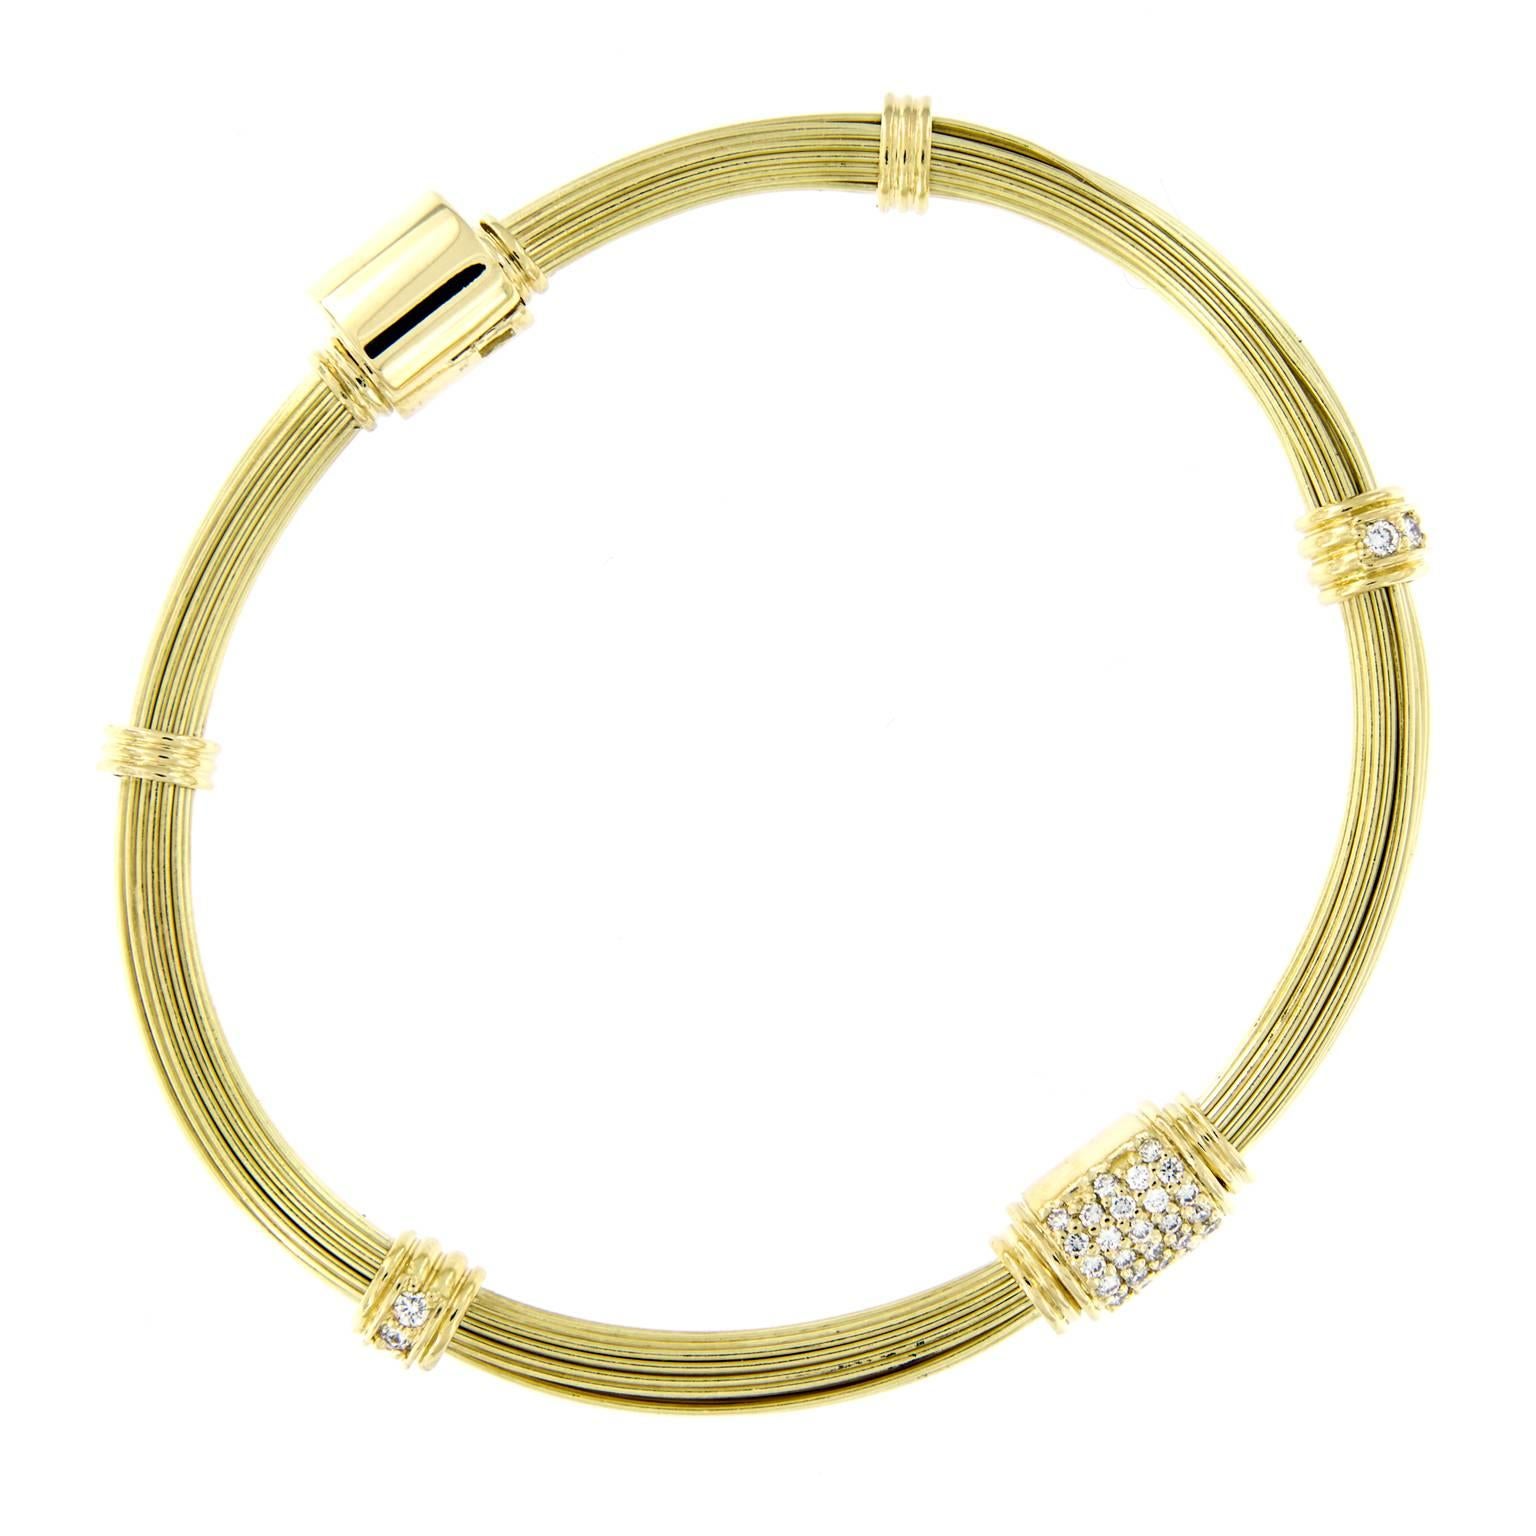 Beautiful 18k yellow gold version of the sought-after iconic elephant hair bangle, worn for good luck. Bracelet features one diamond accented knot & hidden clasp with clamp over safety

Diamonds 0.59 Cttw VVS-VS F-G
 2.25 in. inner diameter